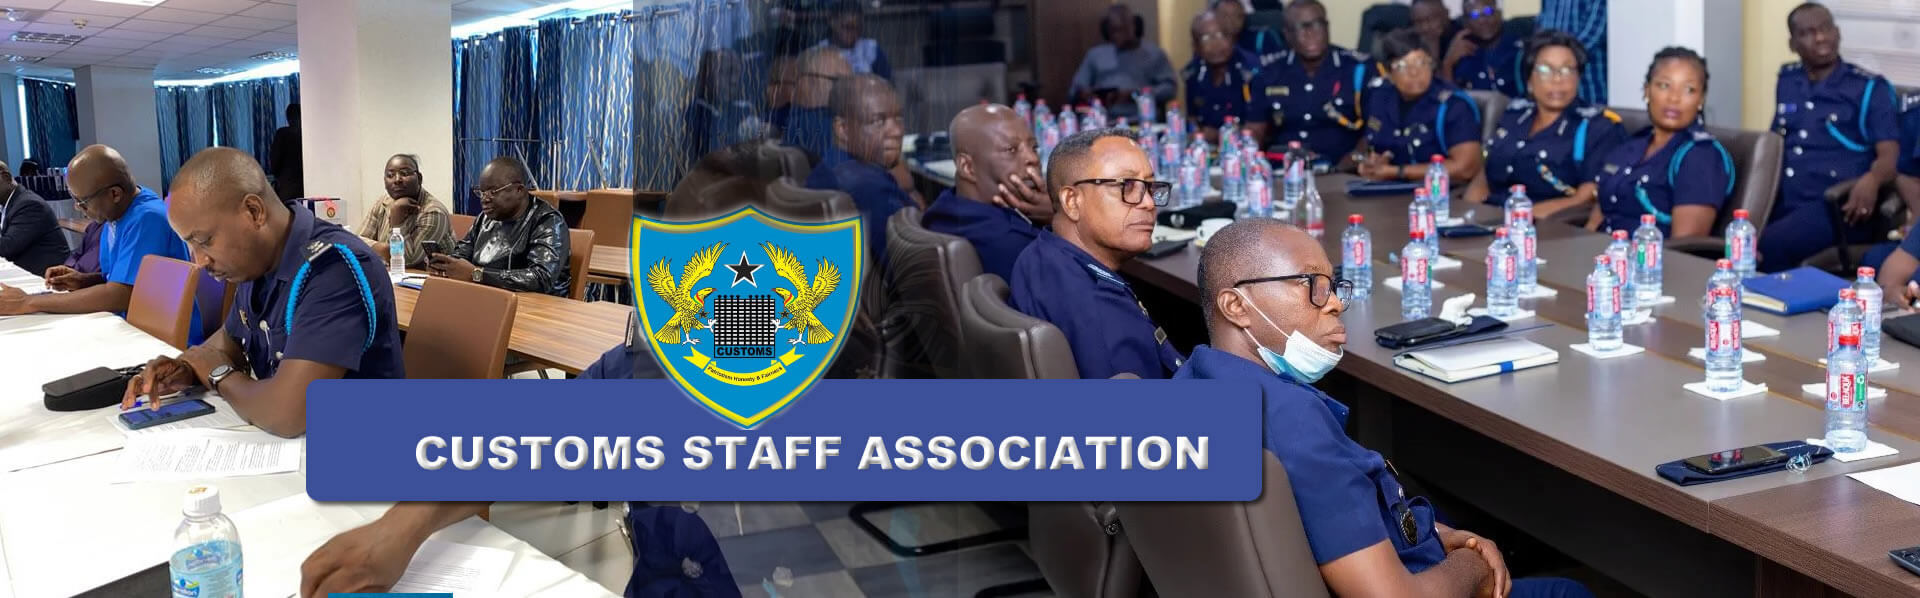 Welcome to Customs Staff Association